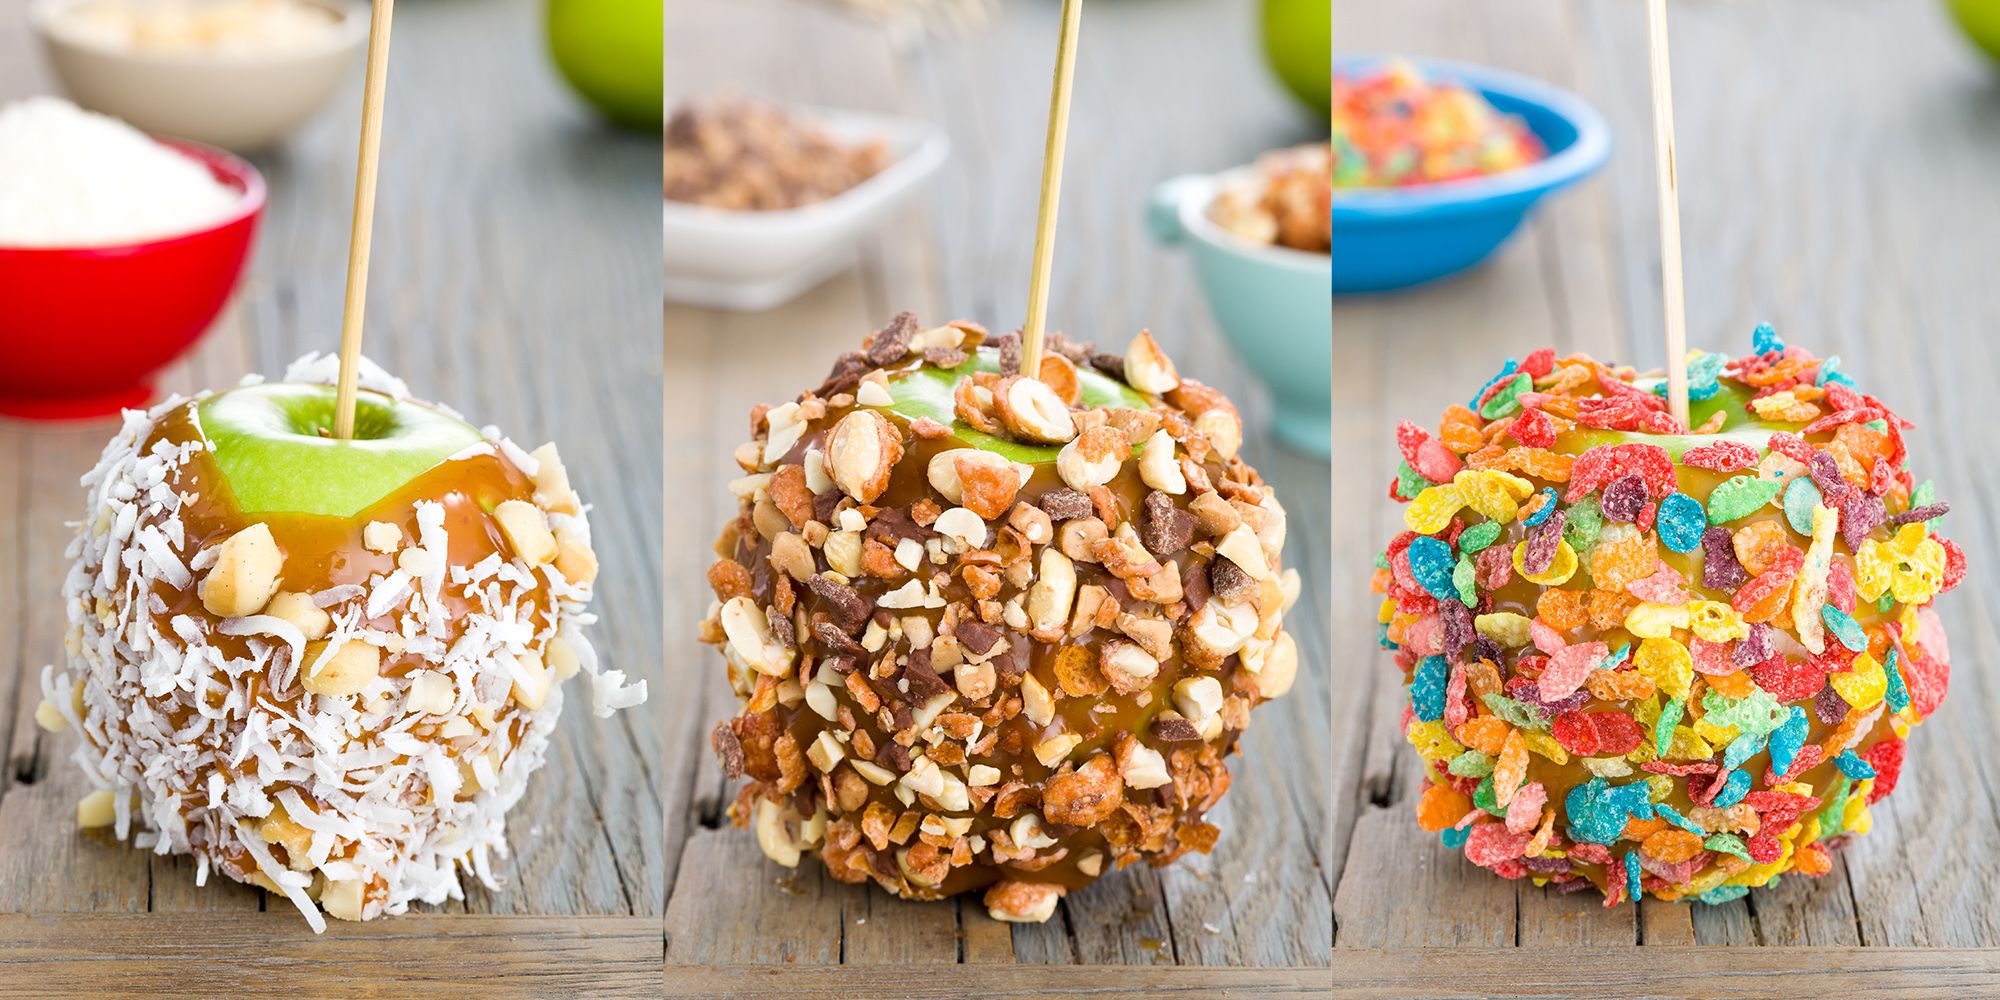 Types of Sticks to Use in Candy Apples  Caramel apples easy, Candy apples,  Candy apple recipe